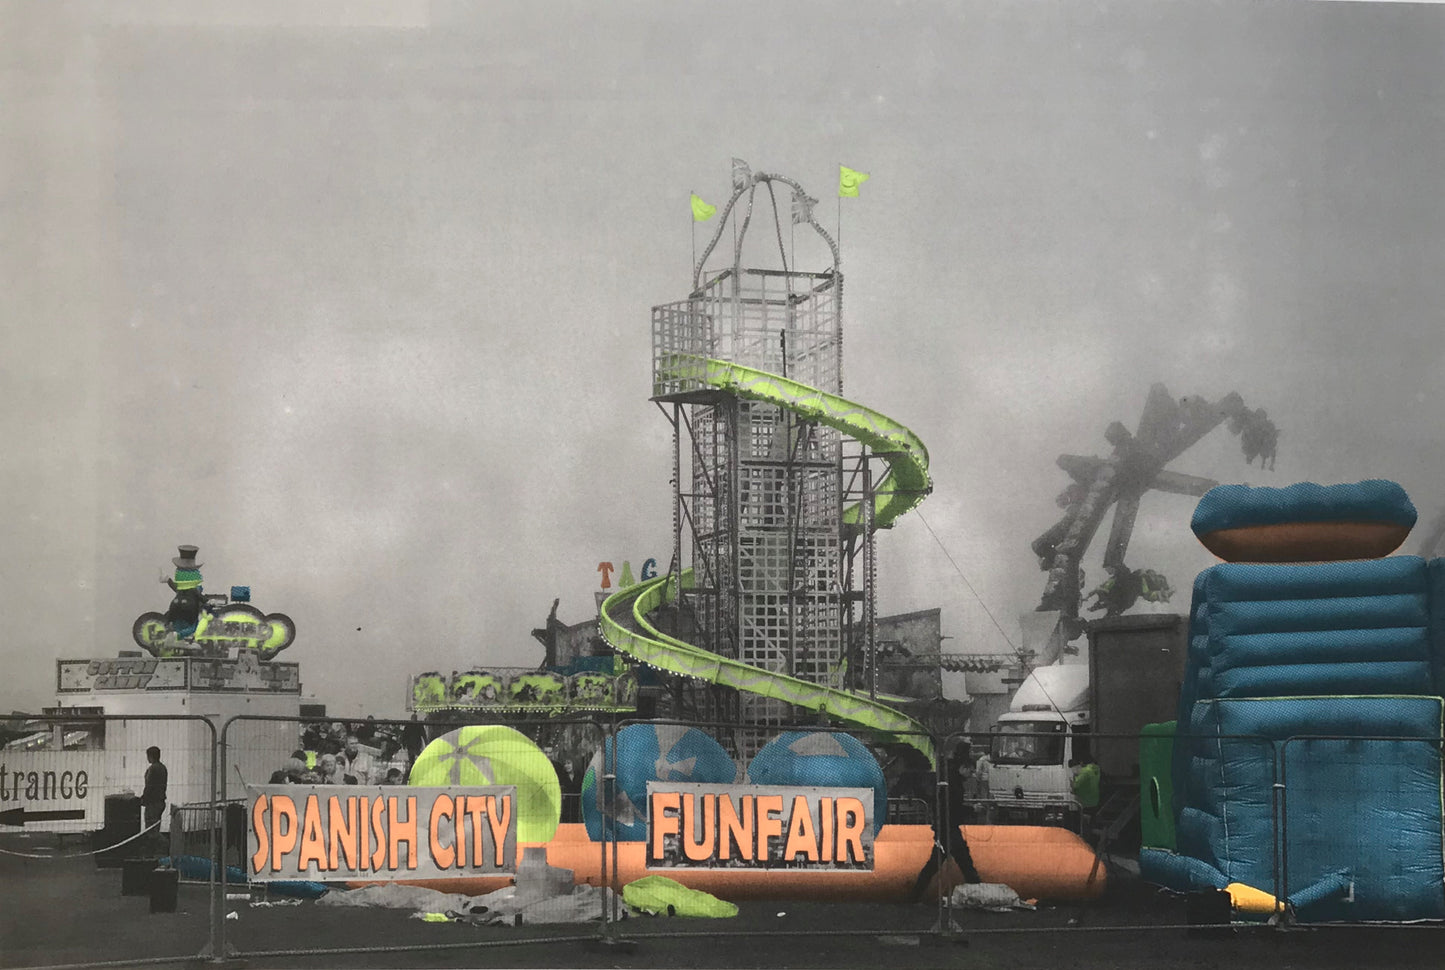 Northumbria, 2017: ‘Spanish City’ funfair in fog, Whitley Bay [leisure, popular culture]